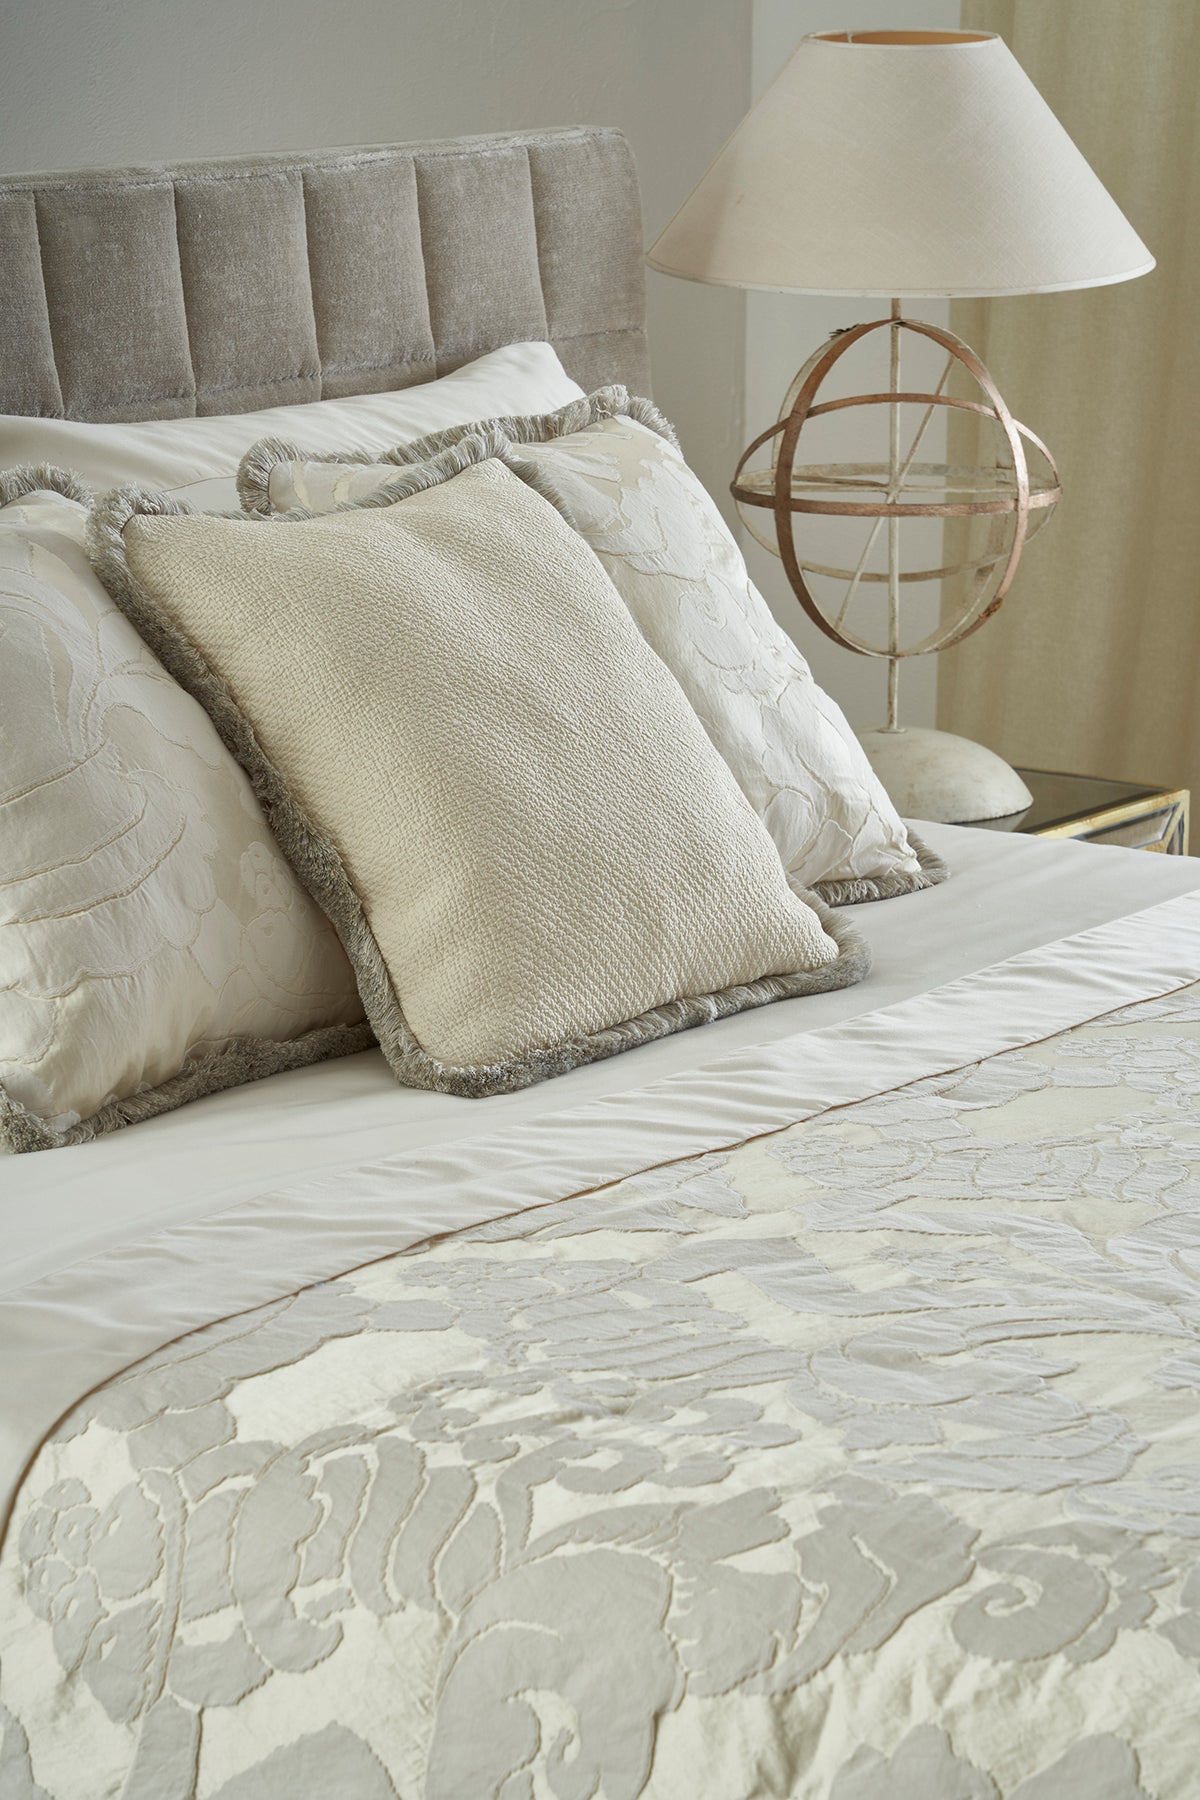 Quilted bedspread and quilt Tivoli damasco